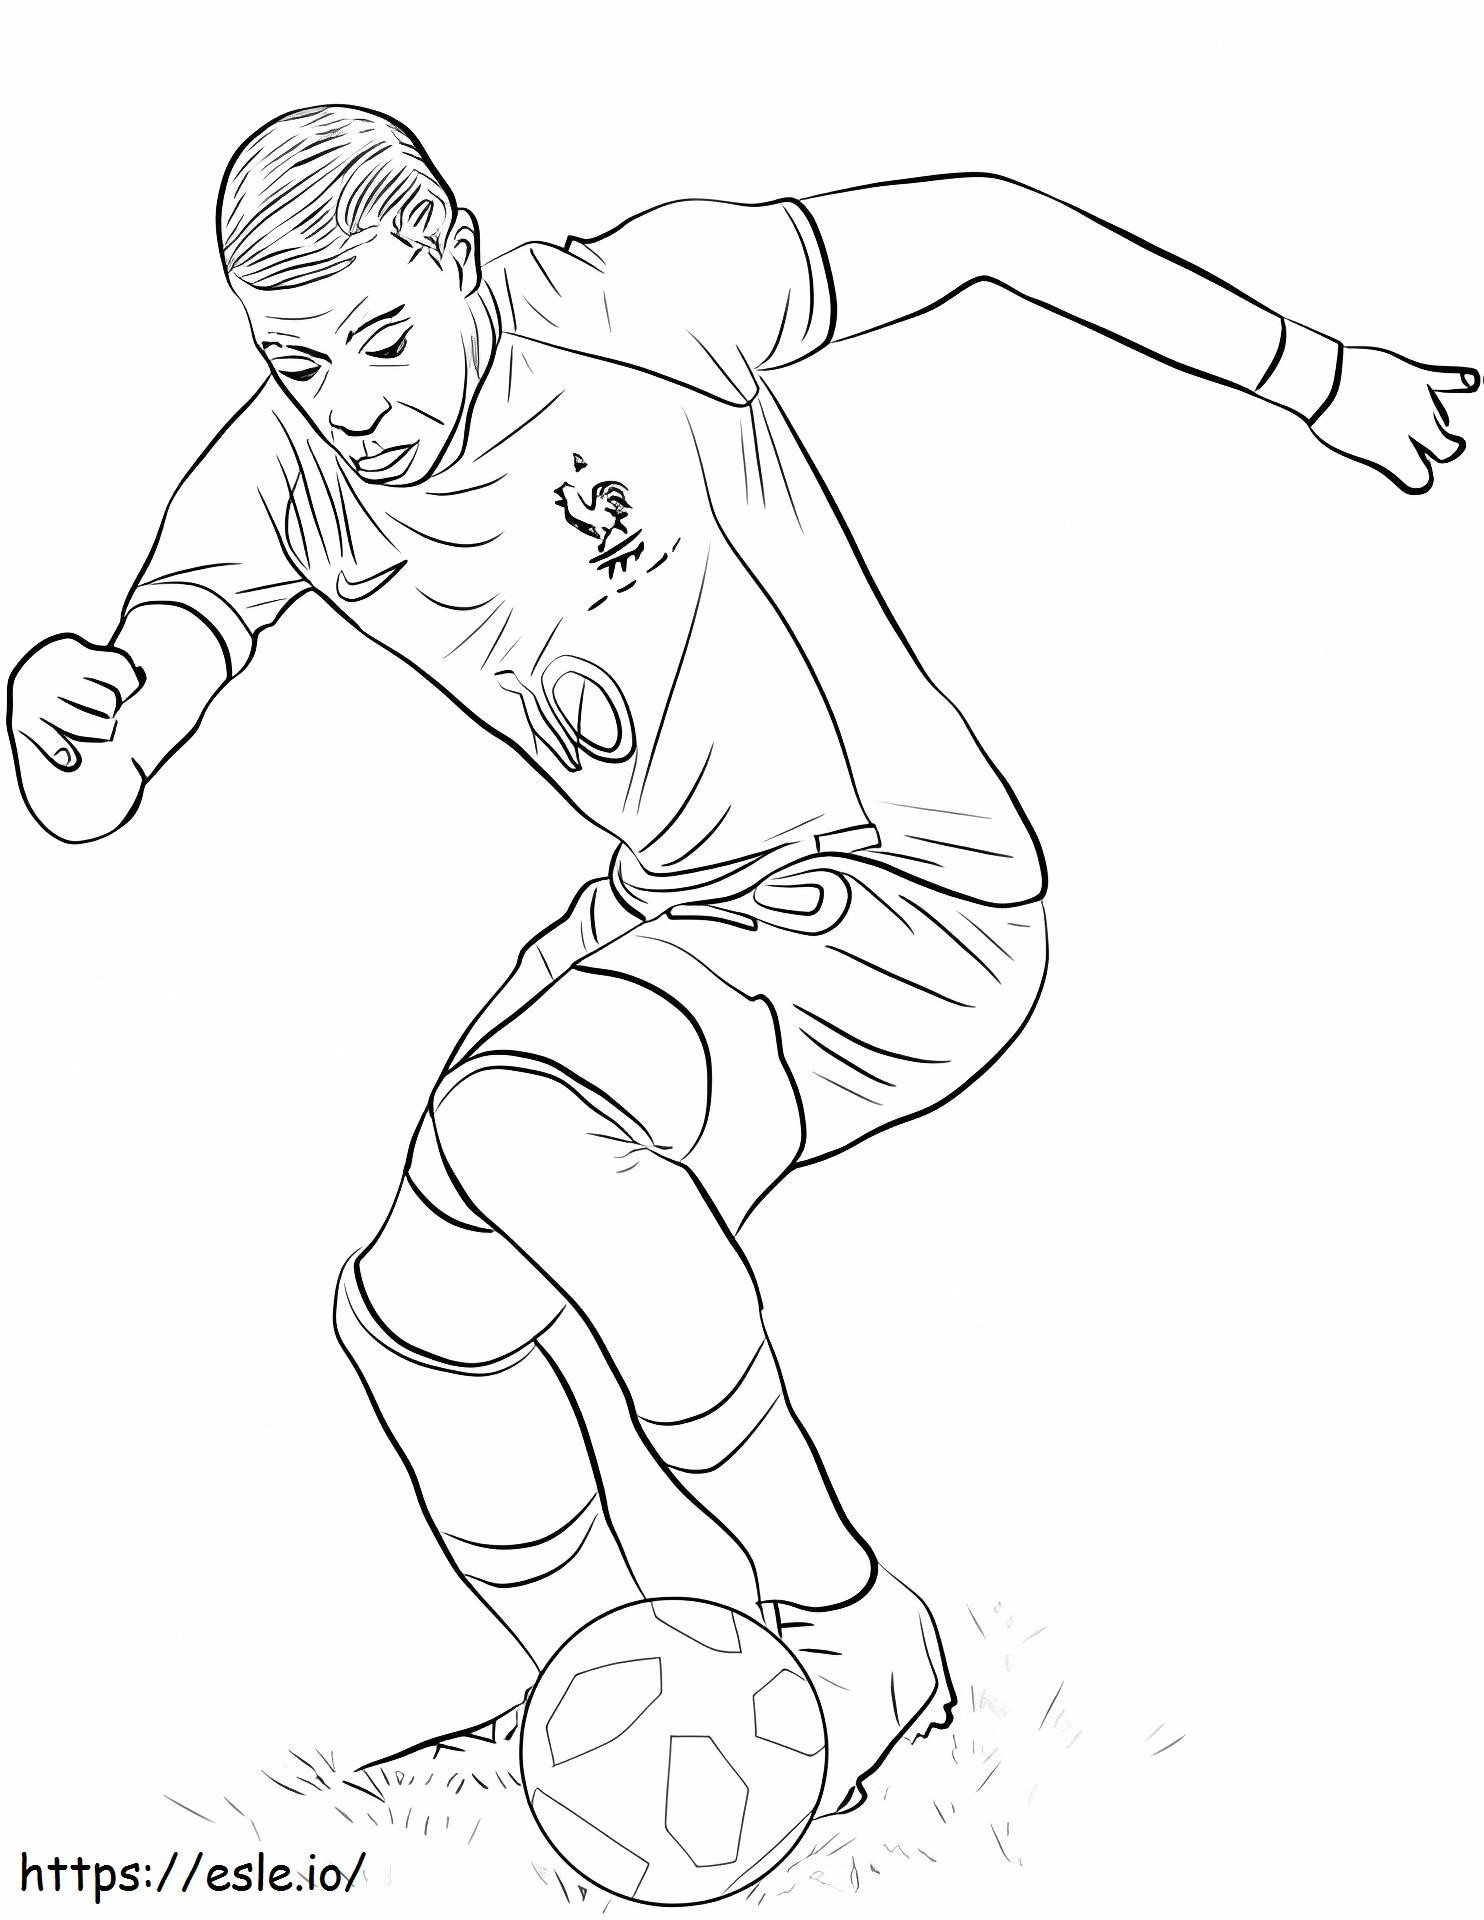 1528774972 Kylian Mbappea4 coloring page